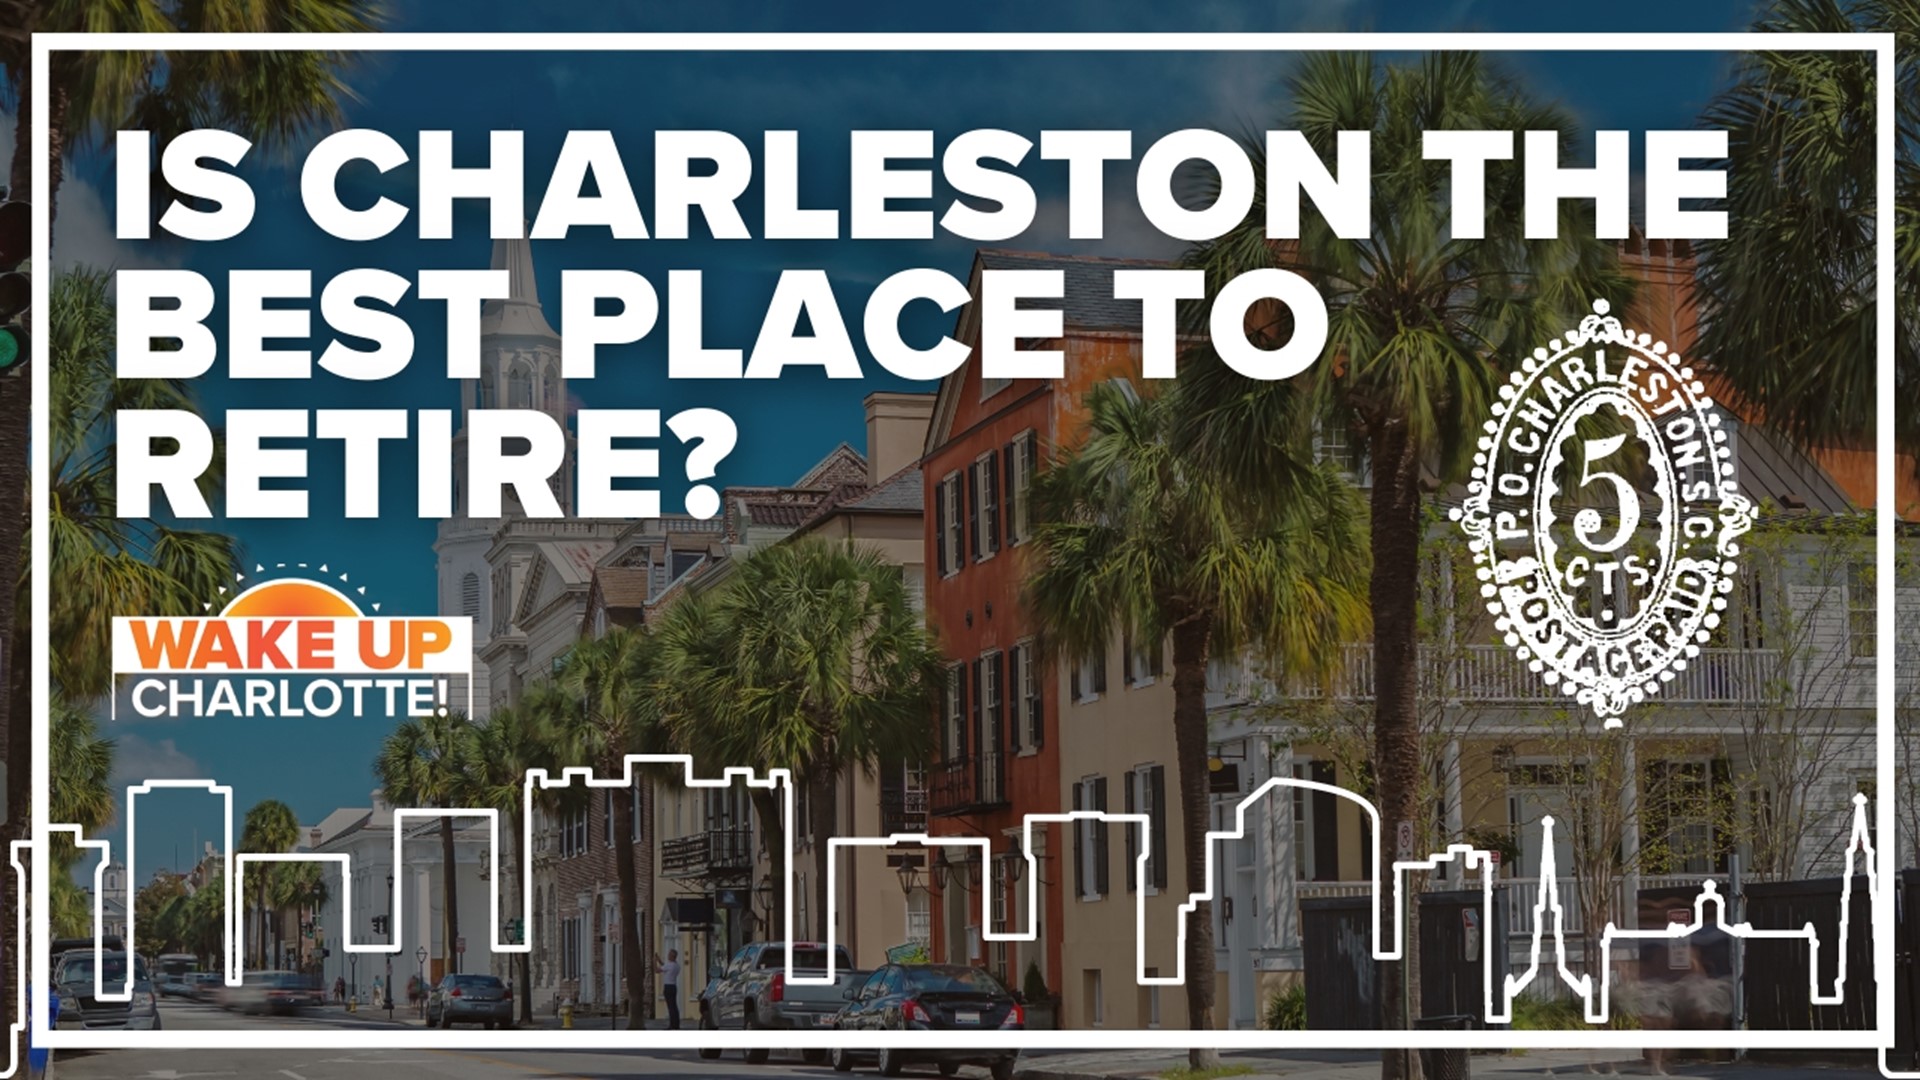 According to WalletHub, you might want to consider moving to Charleston if you're getting ready to retire